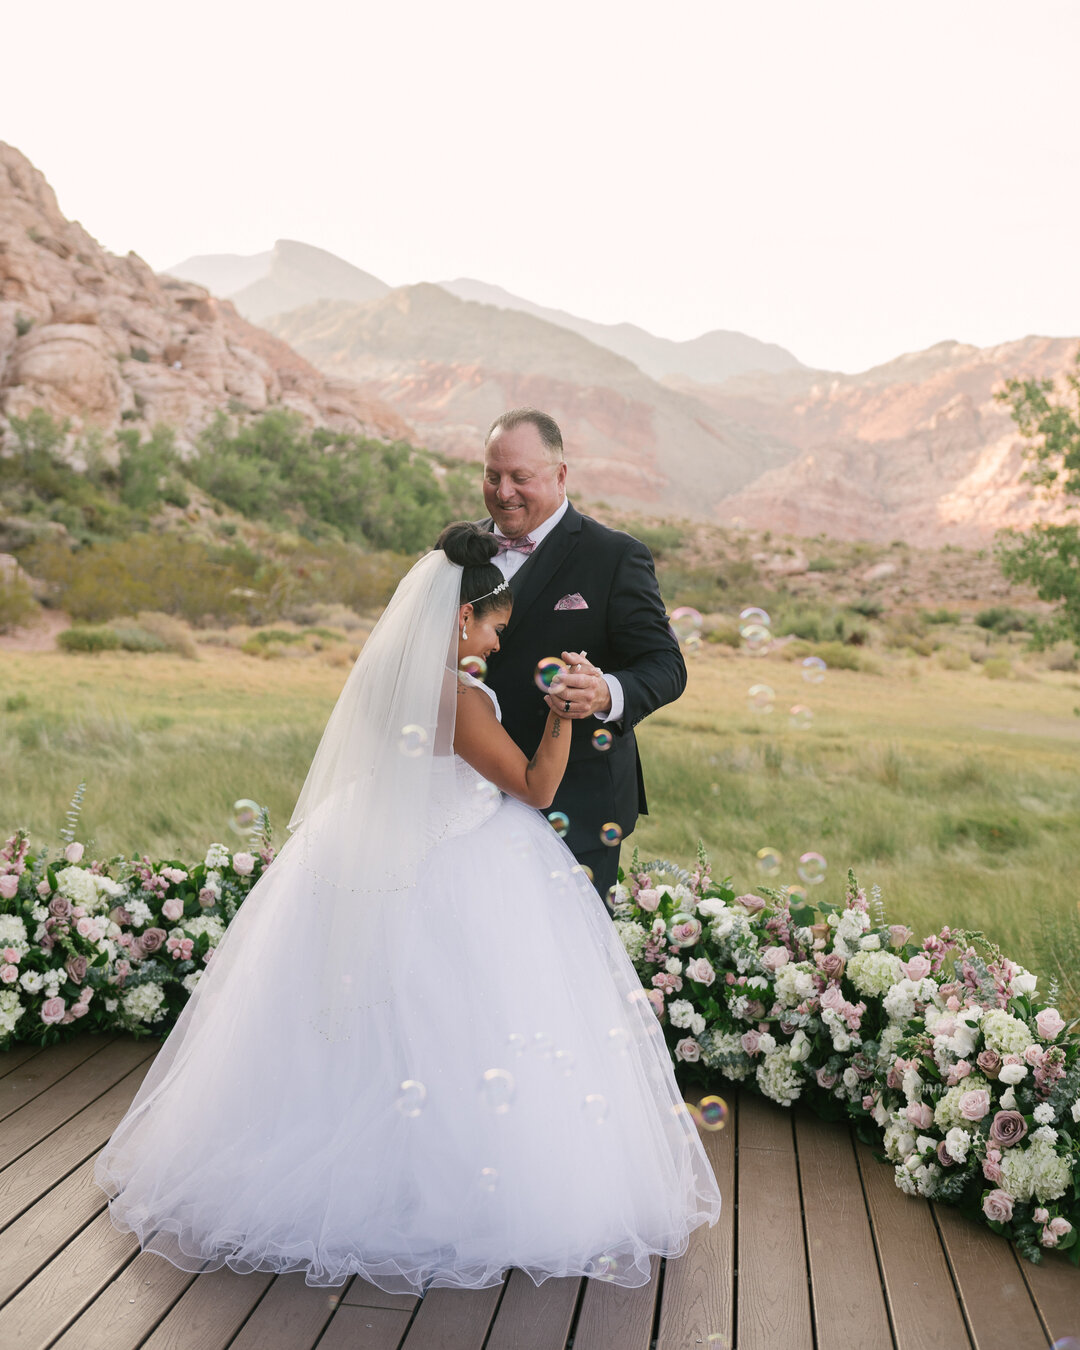 I loved hearing Antoinette + Patrick's love story!  These two had their fairy tale wedding with their loved ones, complete with bubbles for their first dance!! 
Coordination + Permit @elopementlasvegas
Florals @a_wong_events
O